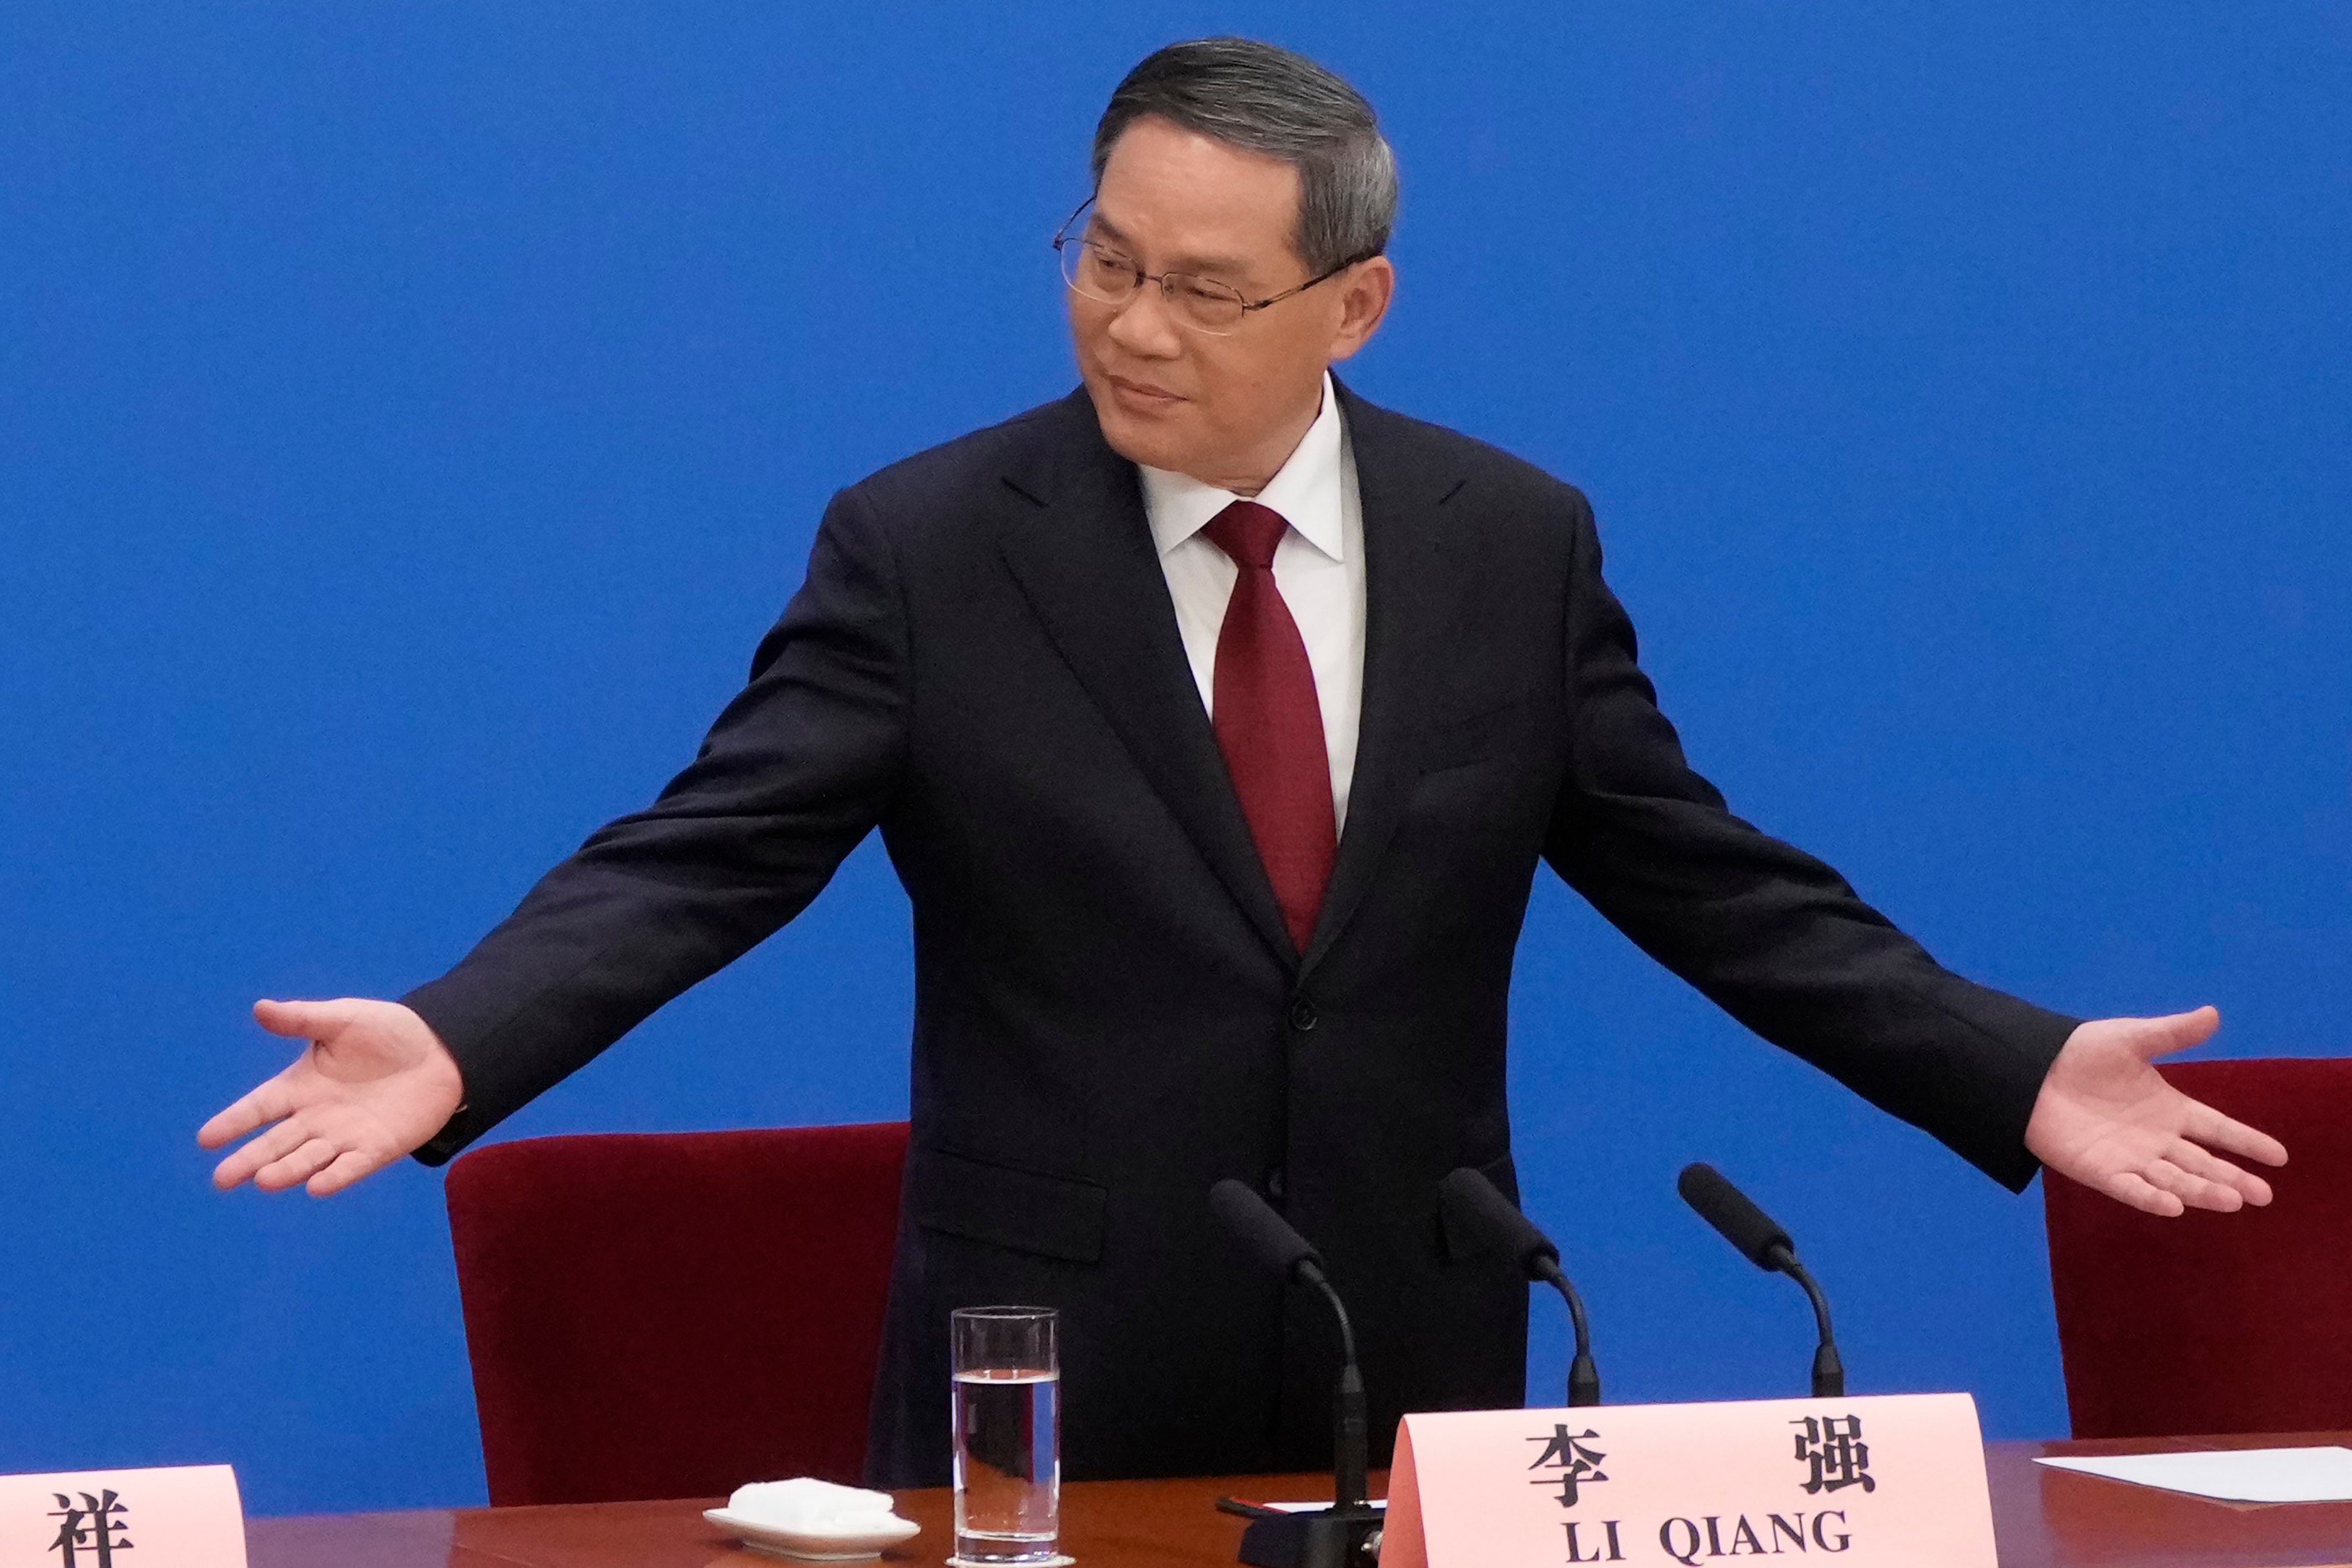 Chinese Premier Li Qiang says the State Council’s role is to faithfully implement party decisions. Photo: AP